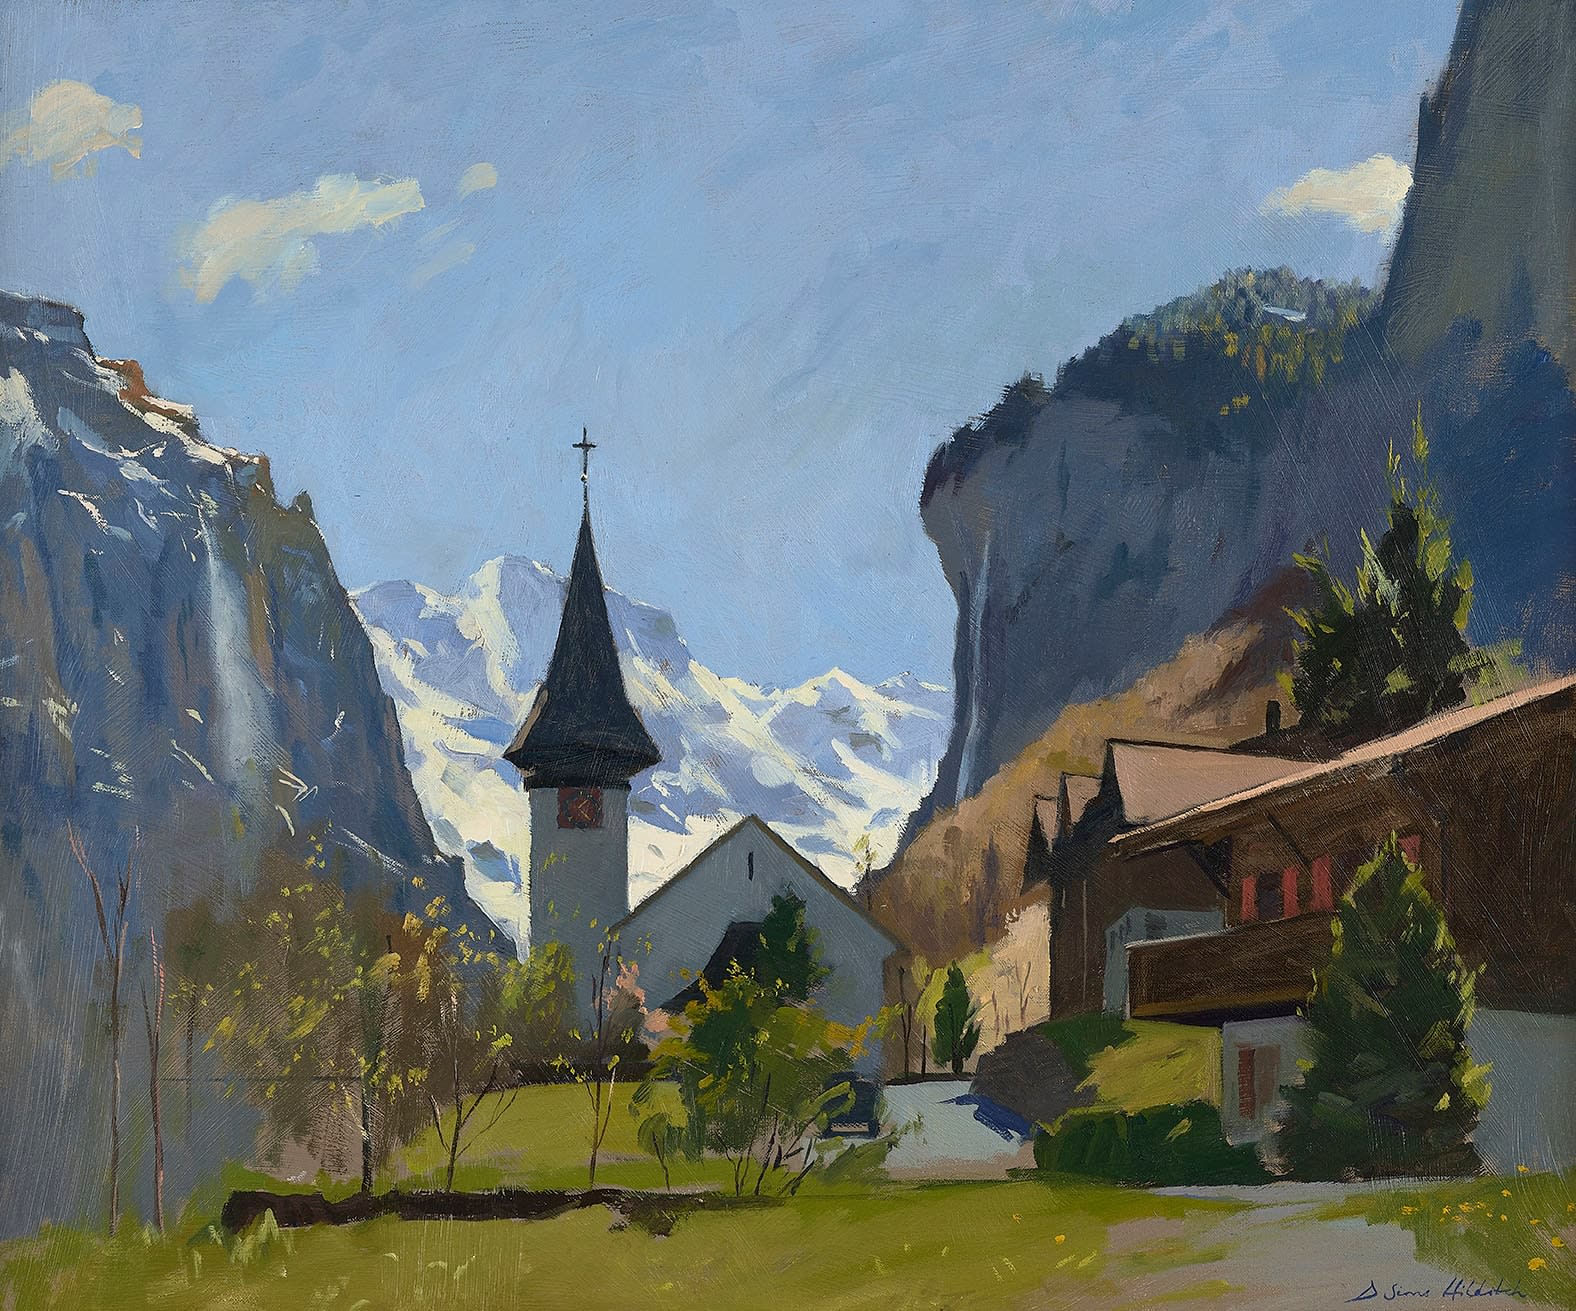 Daisy Sims Hilditch, Spring in the Lauterbrunnen Valley